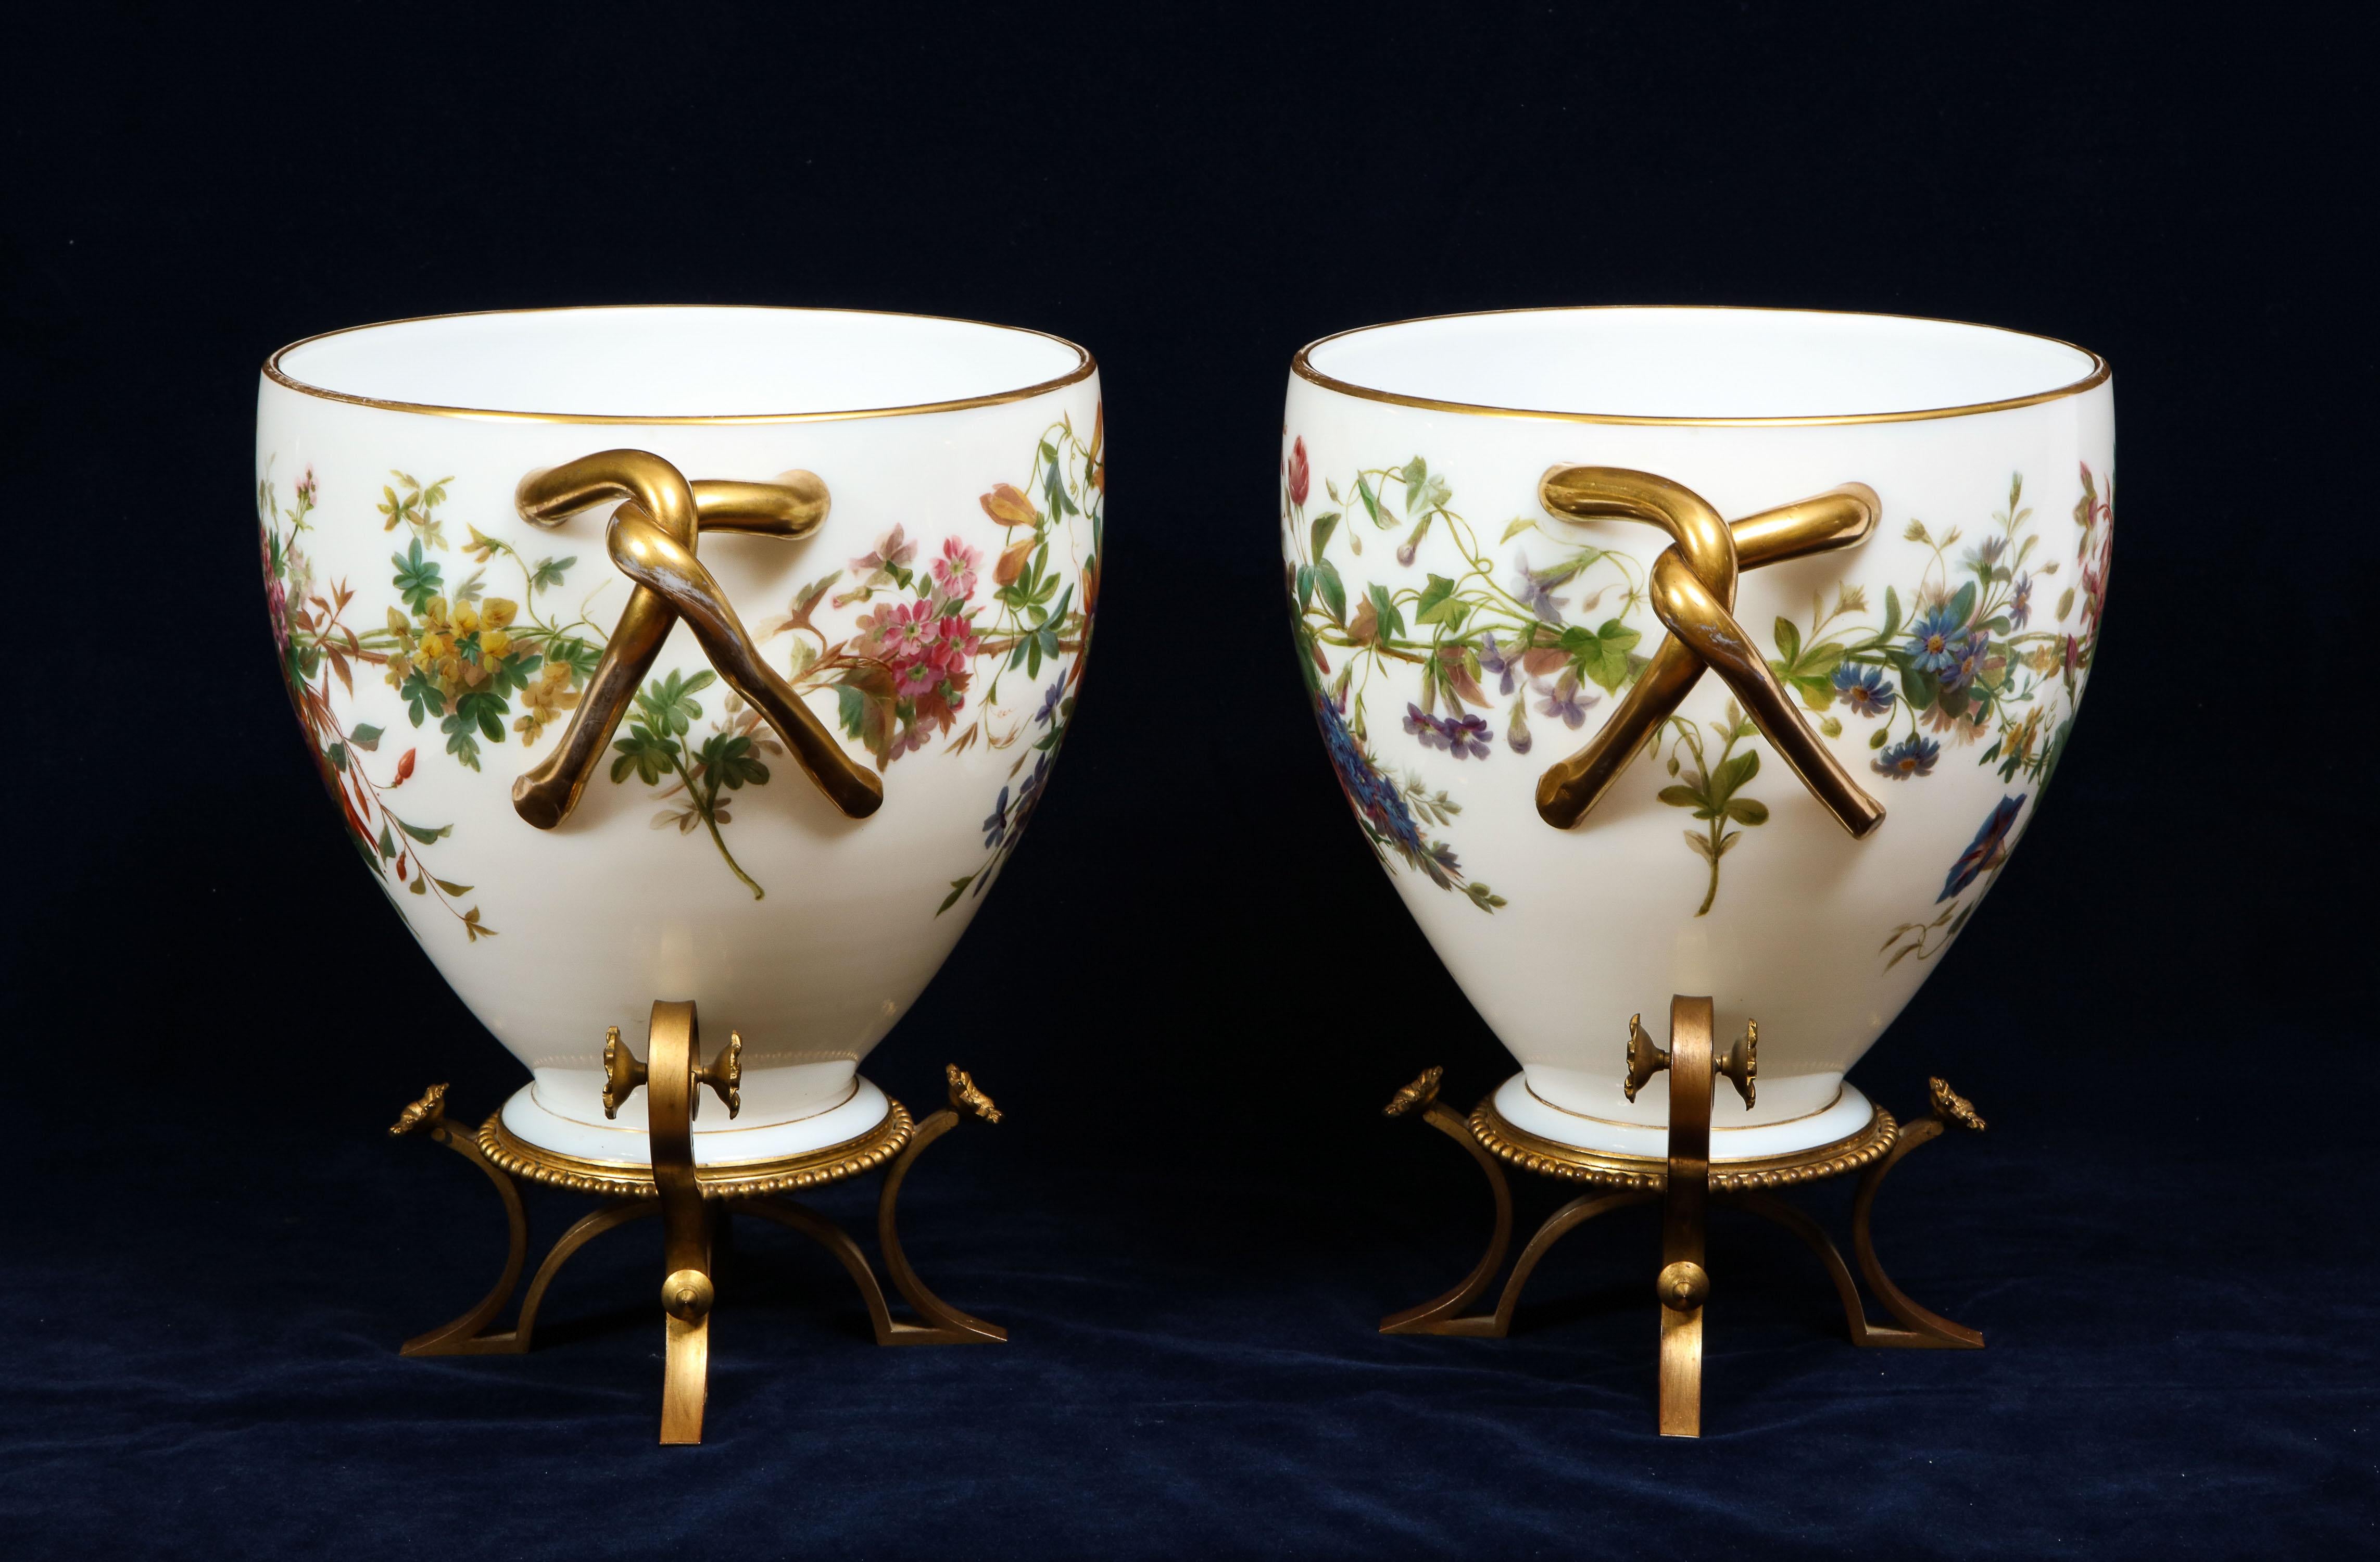 Important Pair of Enamel Hand-Painted White Opaline Vases Signed by Baccarat In Good Condition For Sale In New York, NY